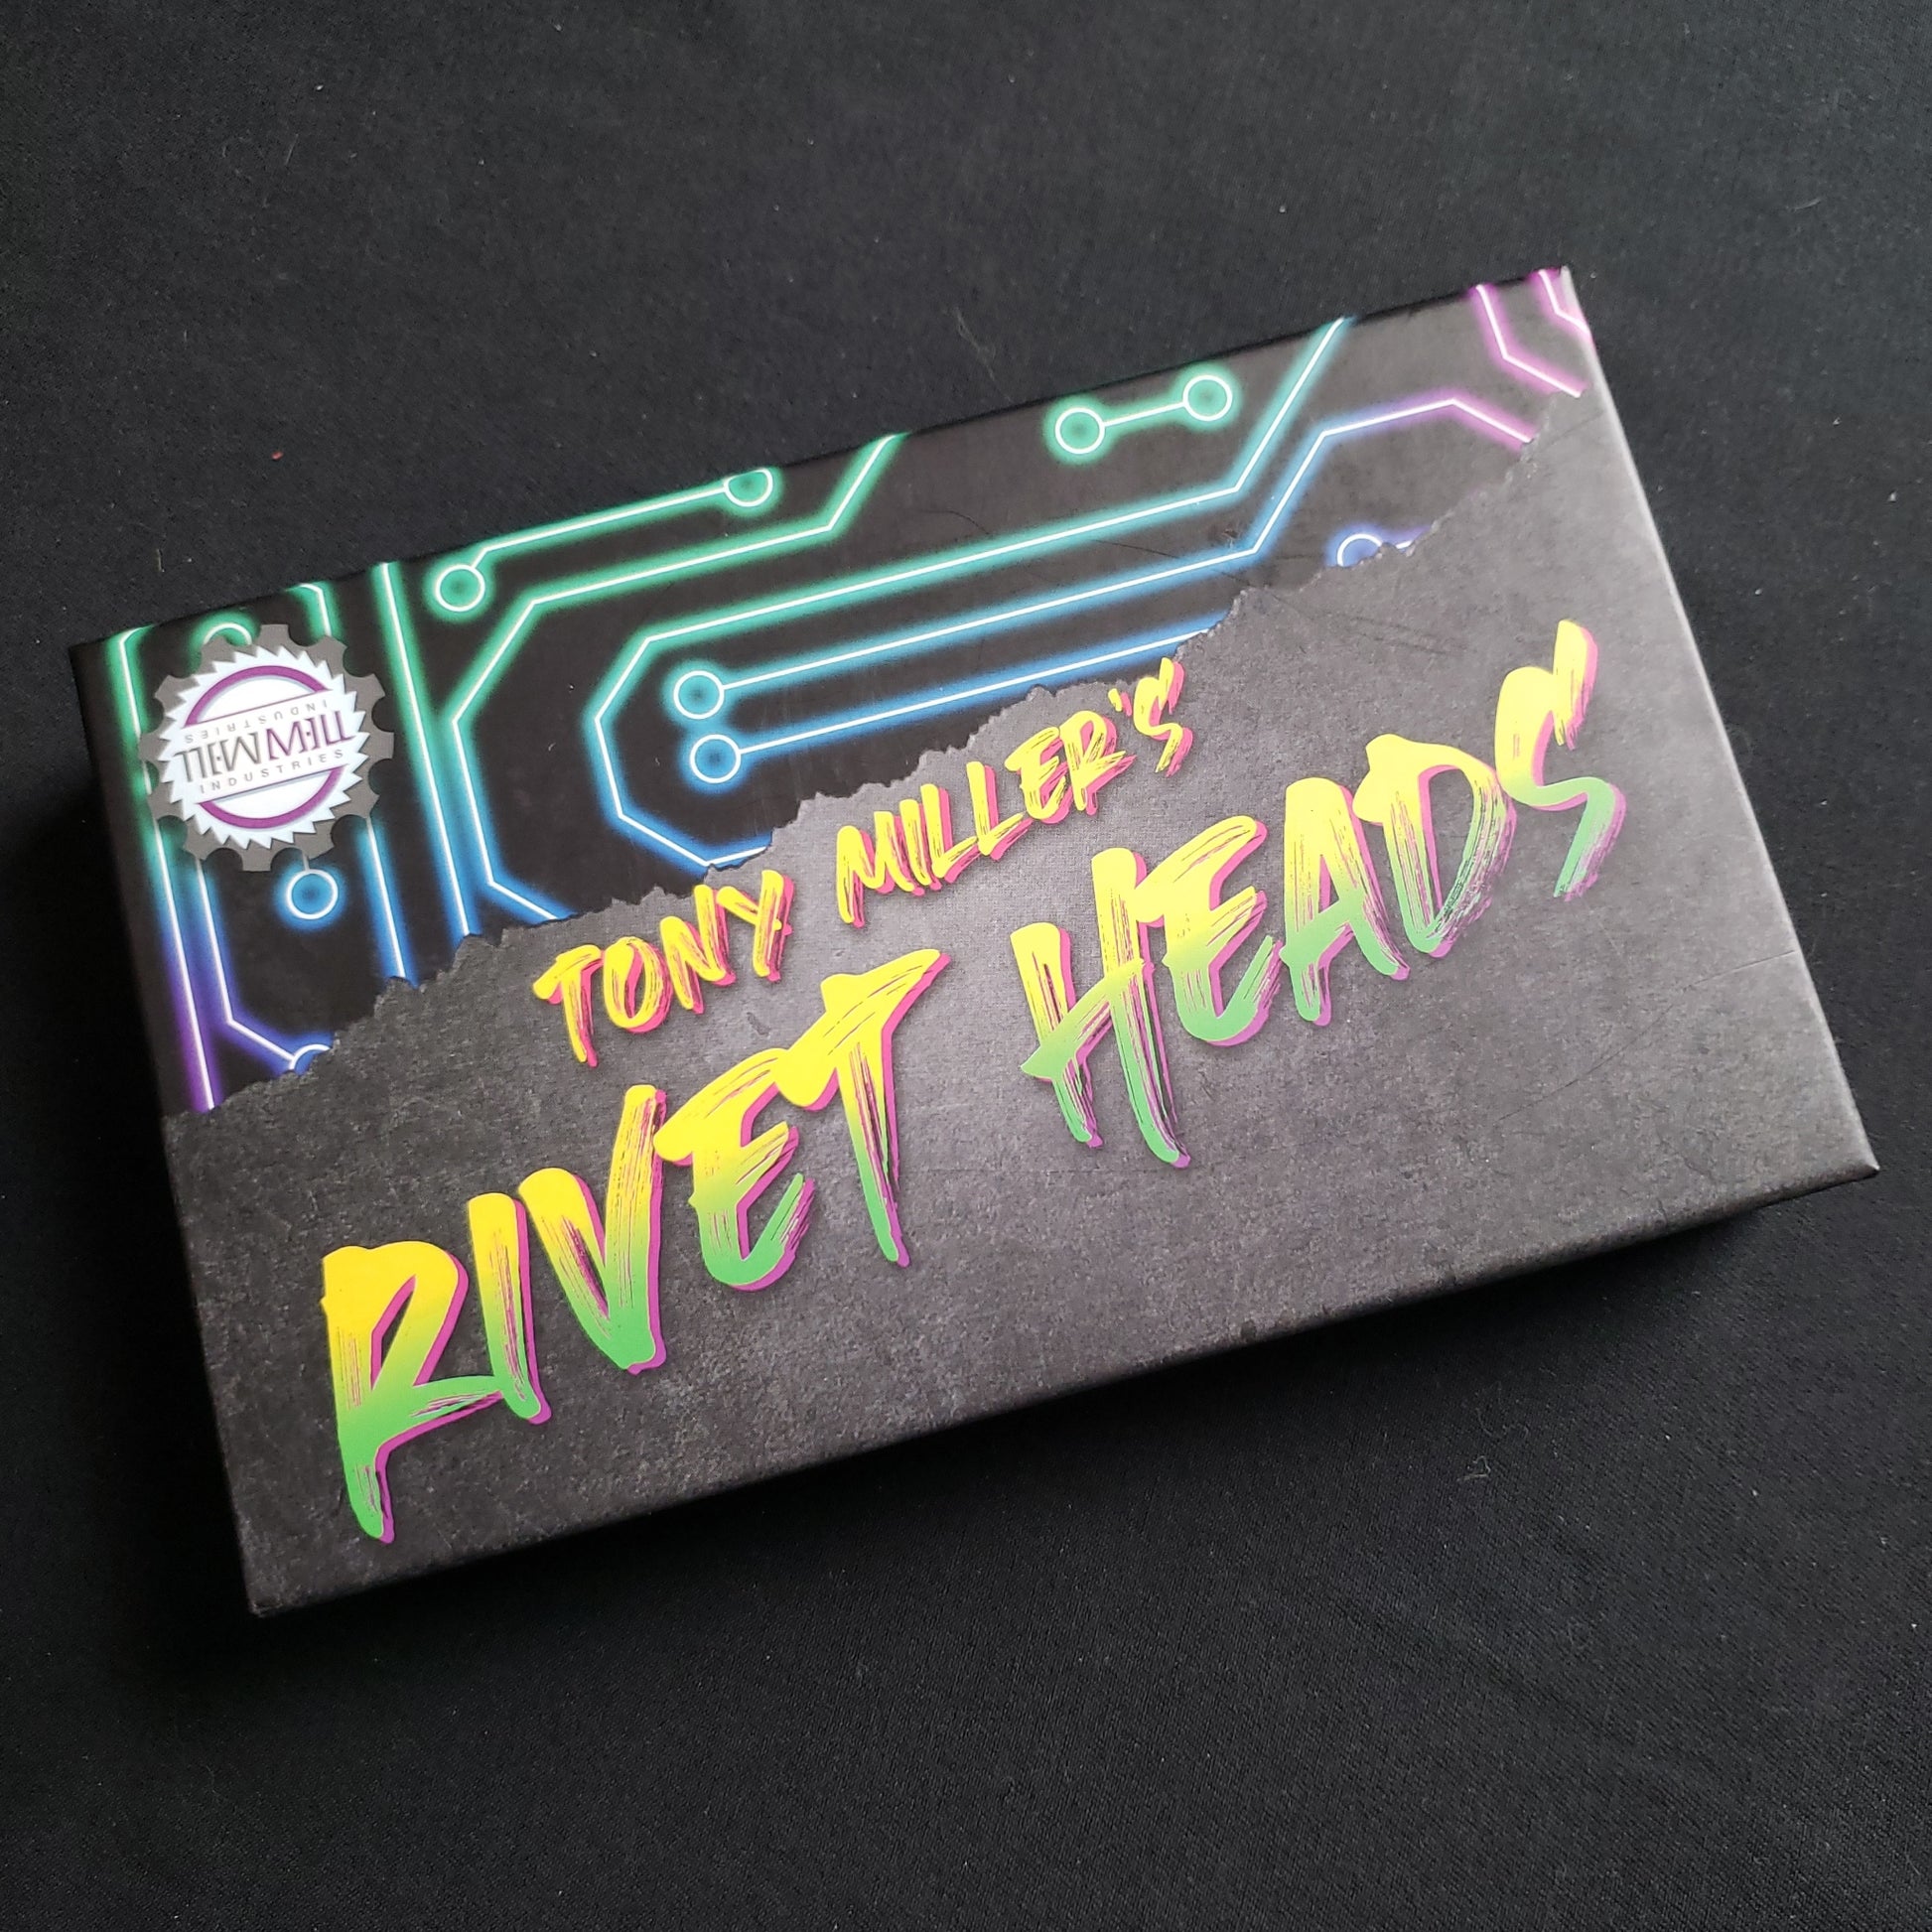 Image shows the front cover of the box of the Rivet Heads card game